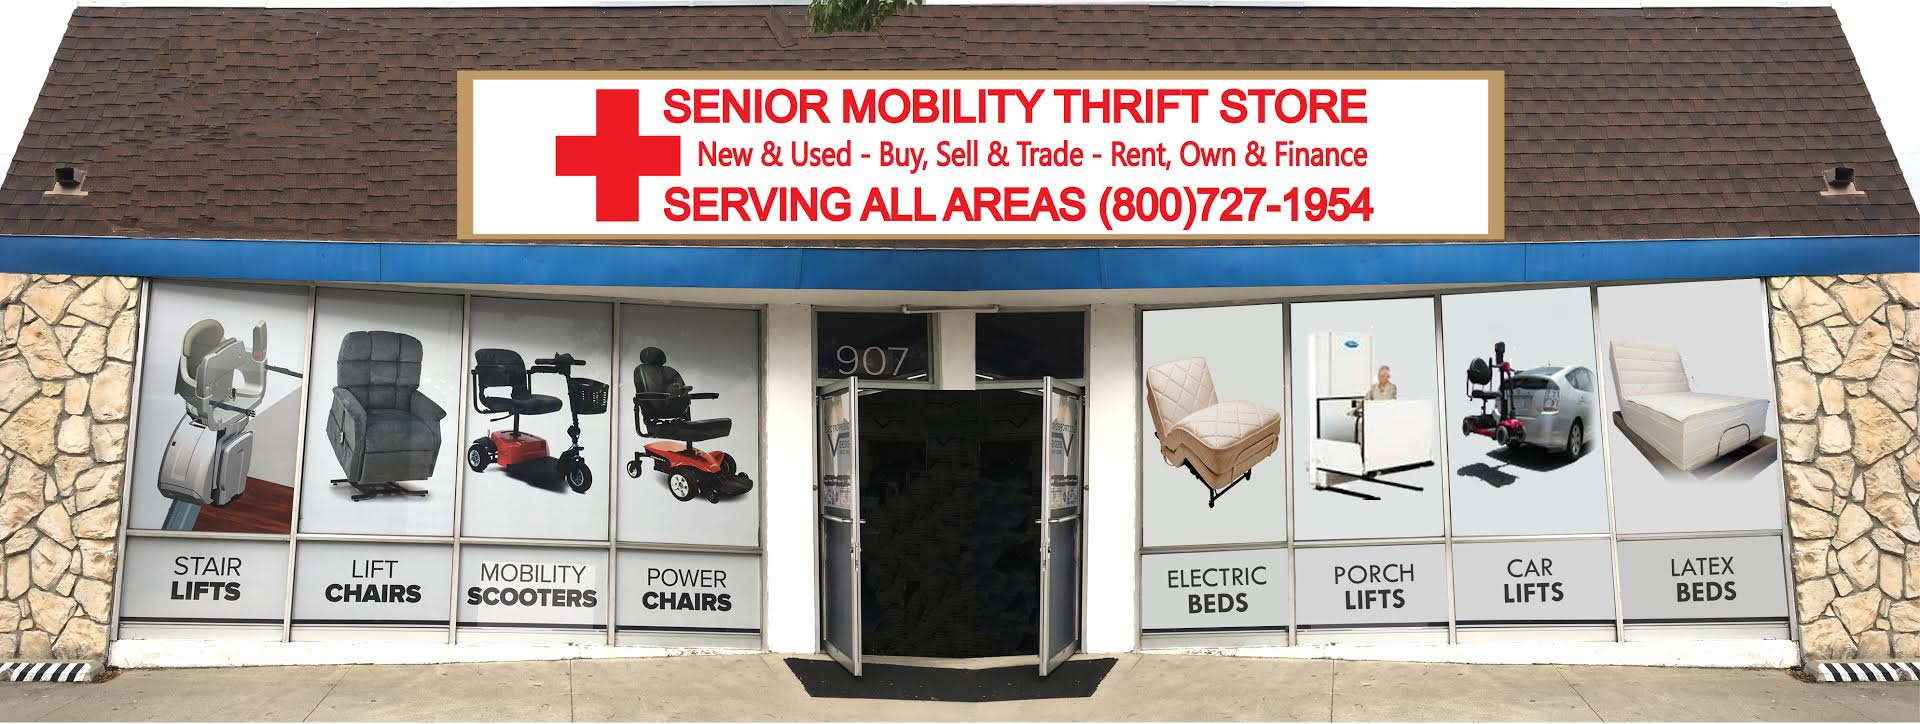 phoenix senior mobility thrift store scottsdale affordable stairlifts mesa cheap stairchair tempe discount chairlift glendale az inexpensive stair lift goodyear sale price stairlifts cost